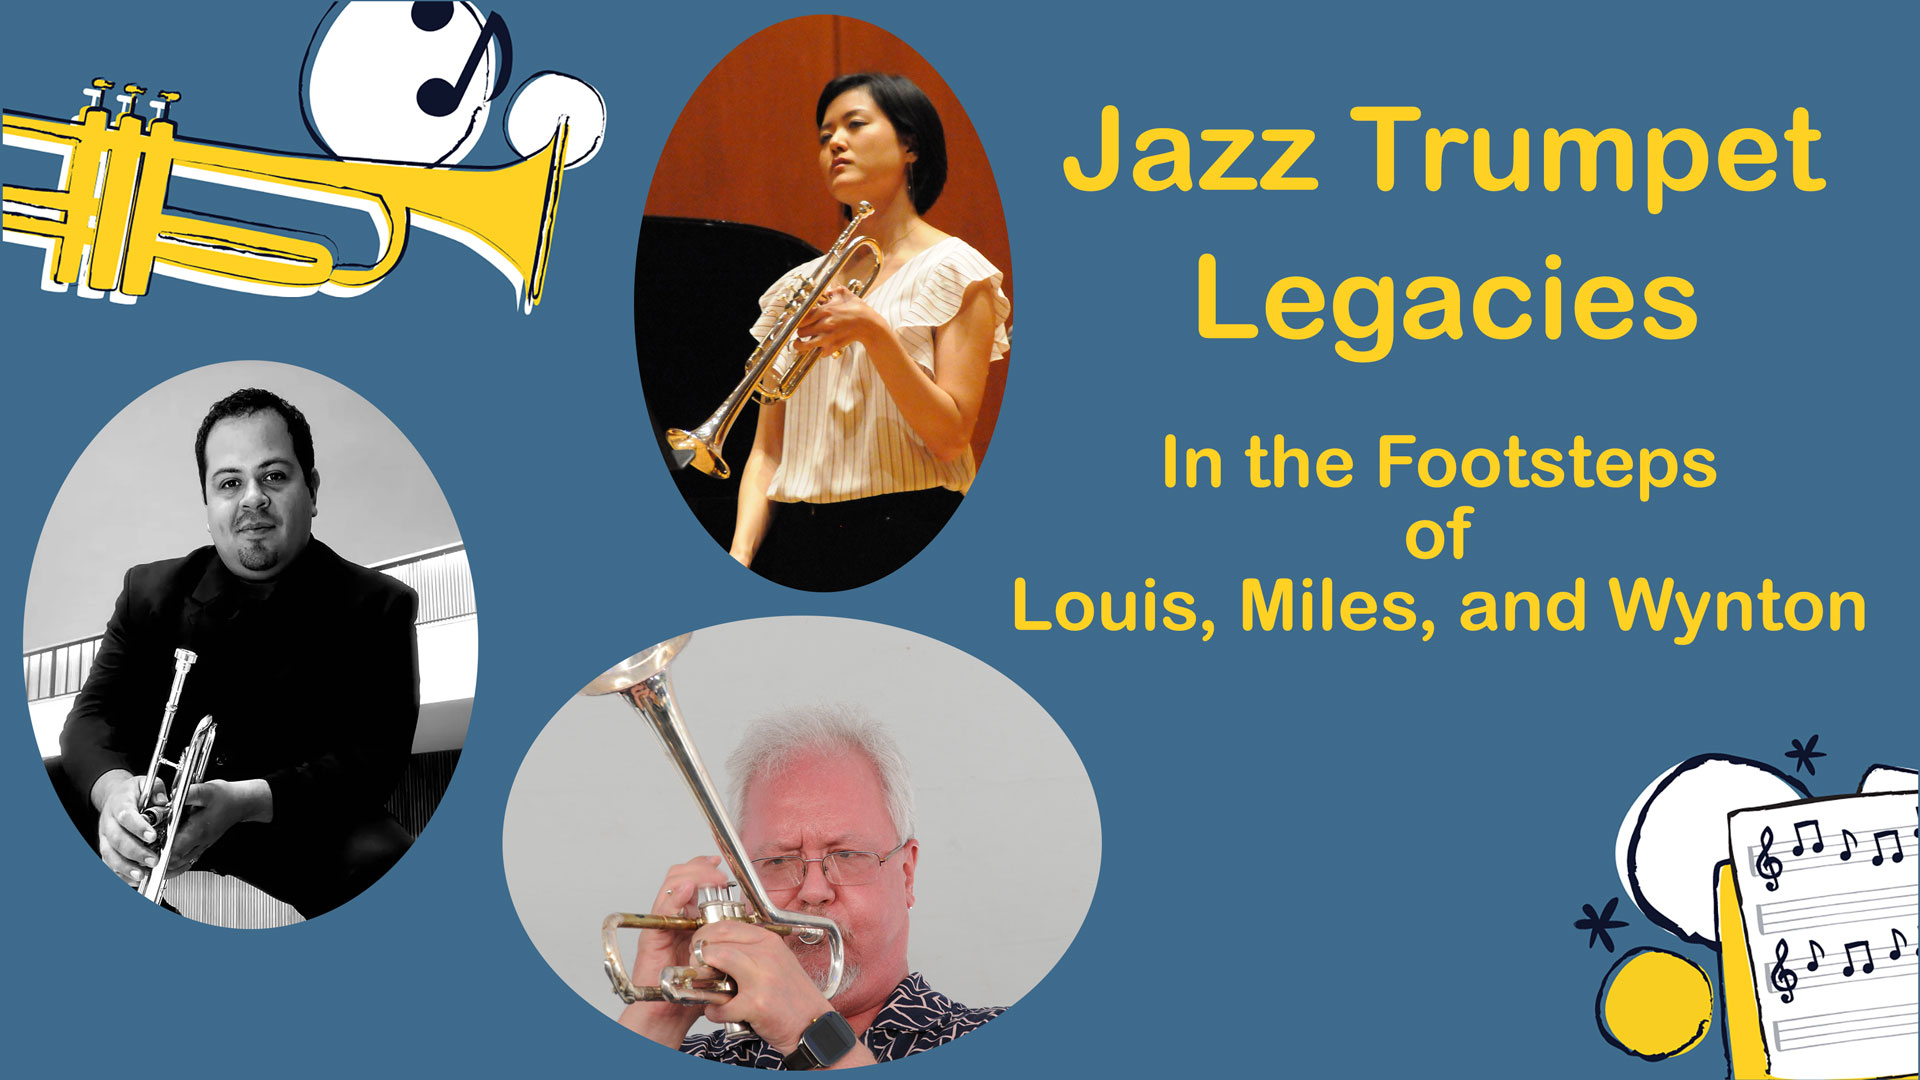 photos of three jazz musicians on a blue background with yellow text that reads: Jazz Trumpet Legacies, in the footsteps of Louis, Miles, and Wynton